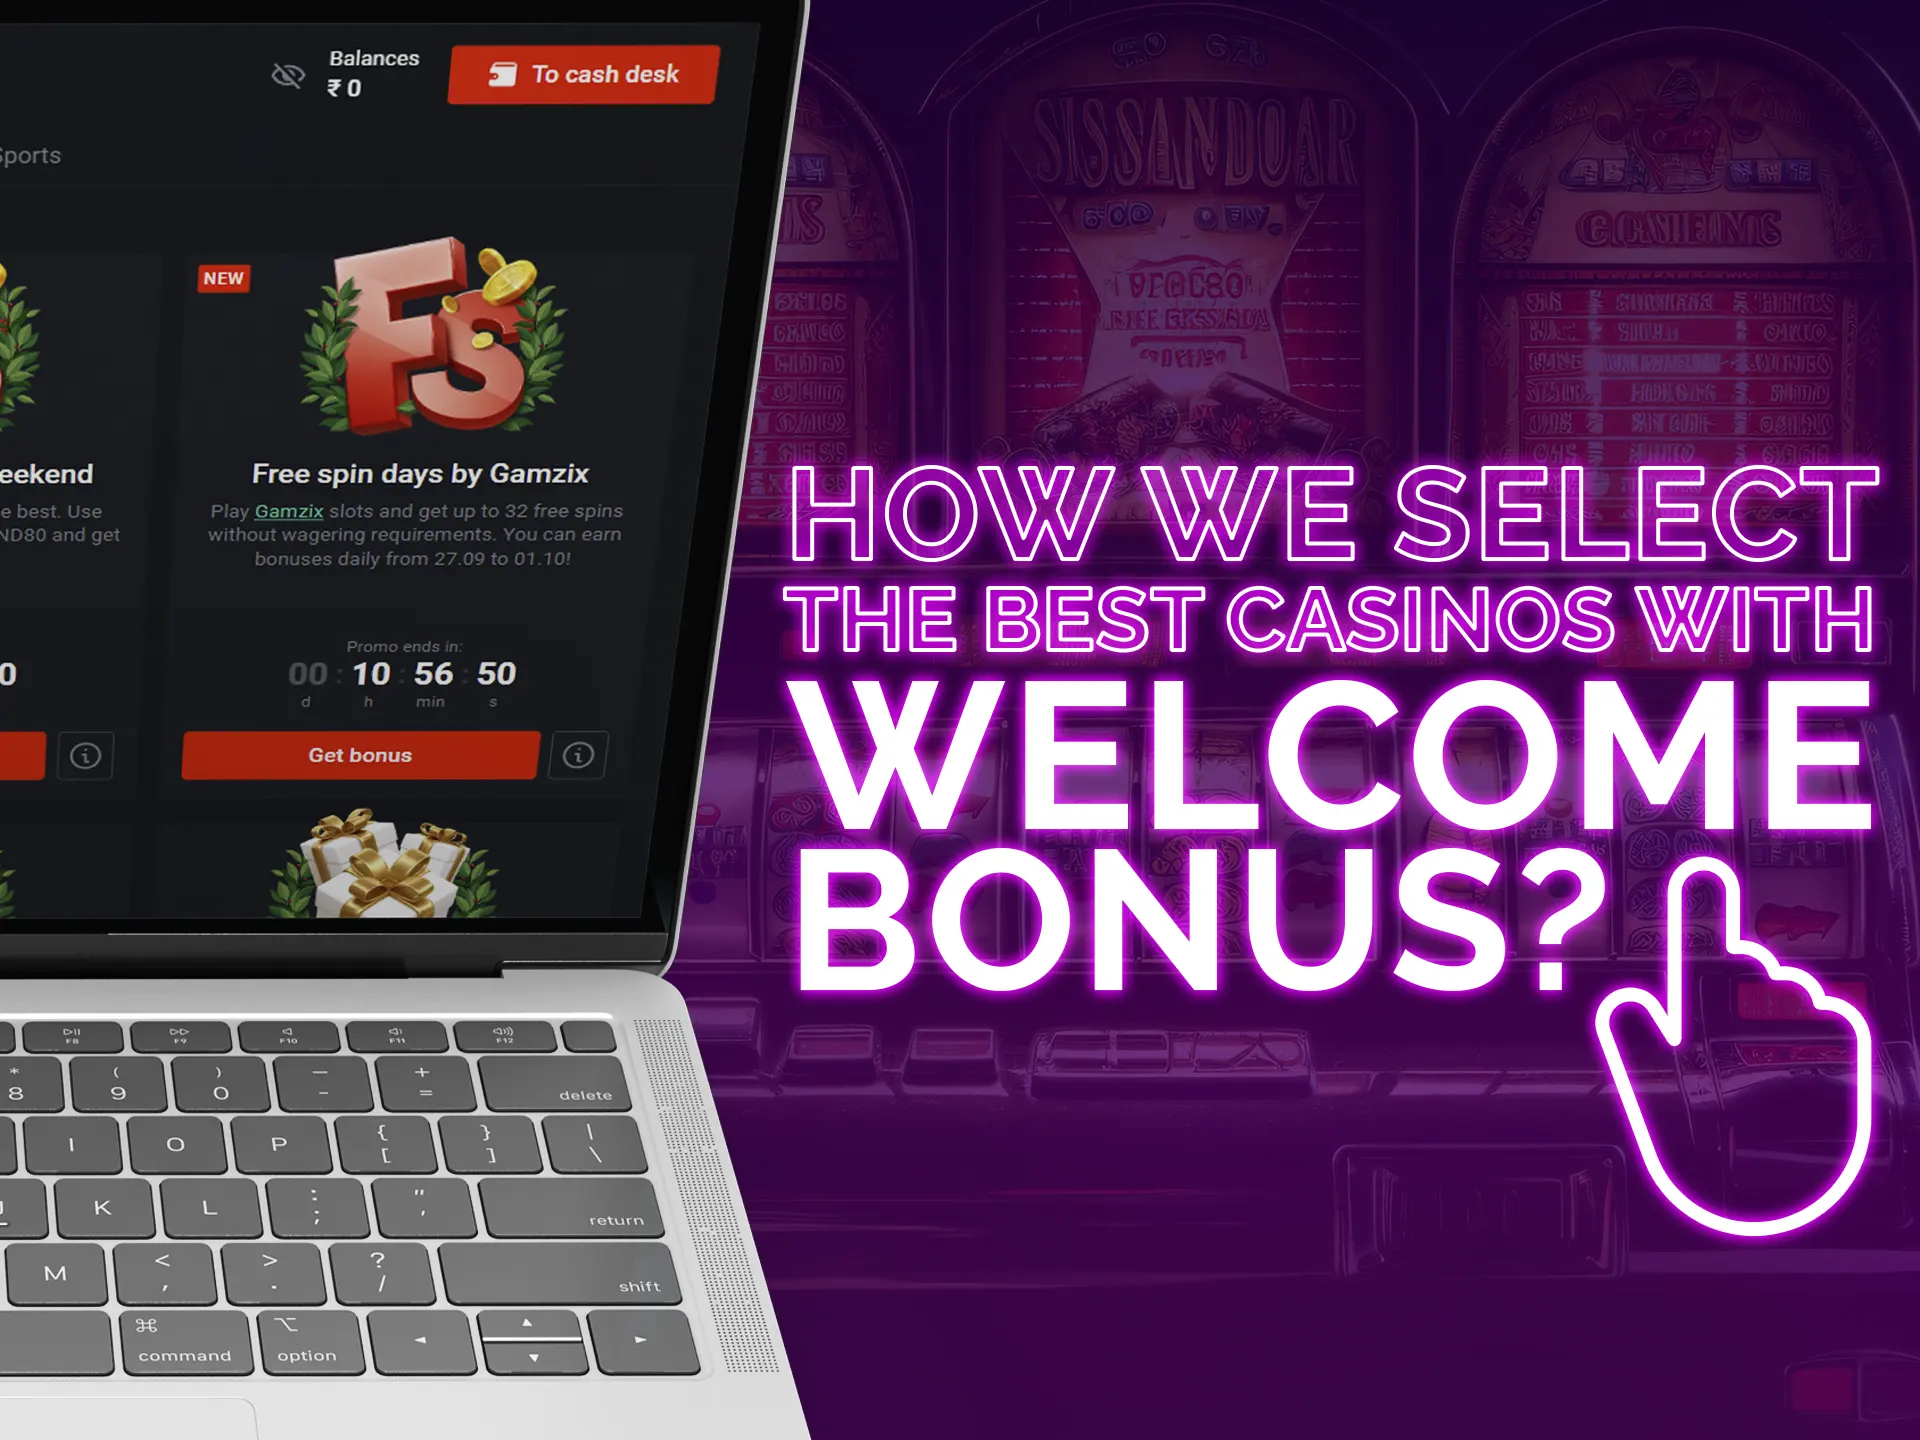 The ways how we selecting the best casinos with welcome bonuses.